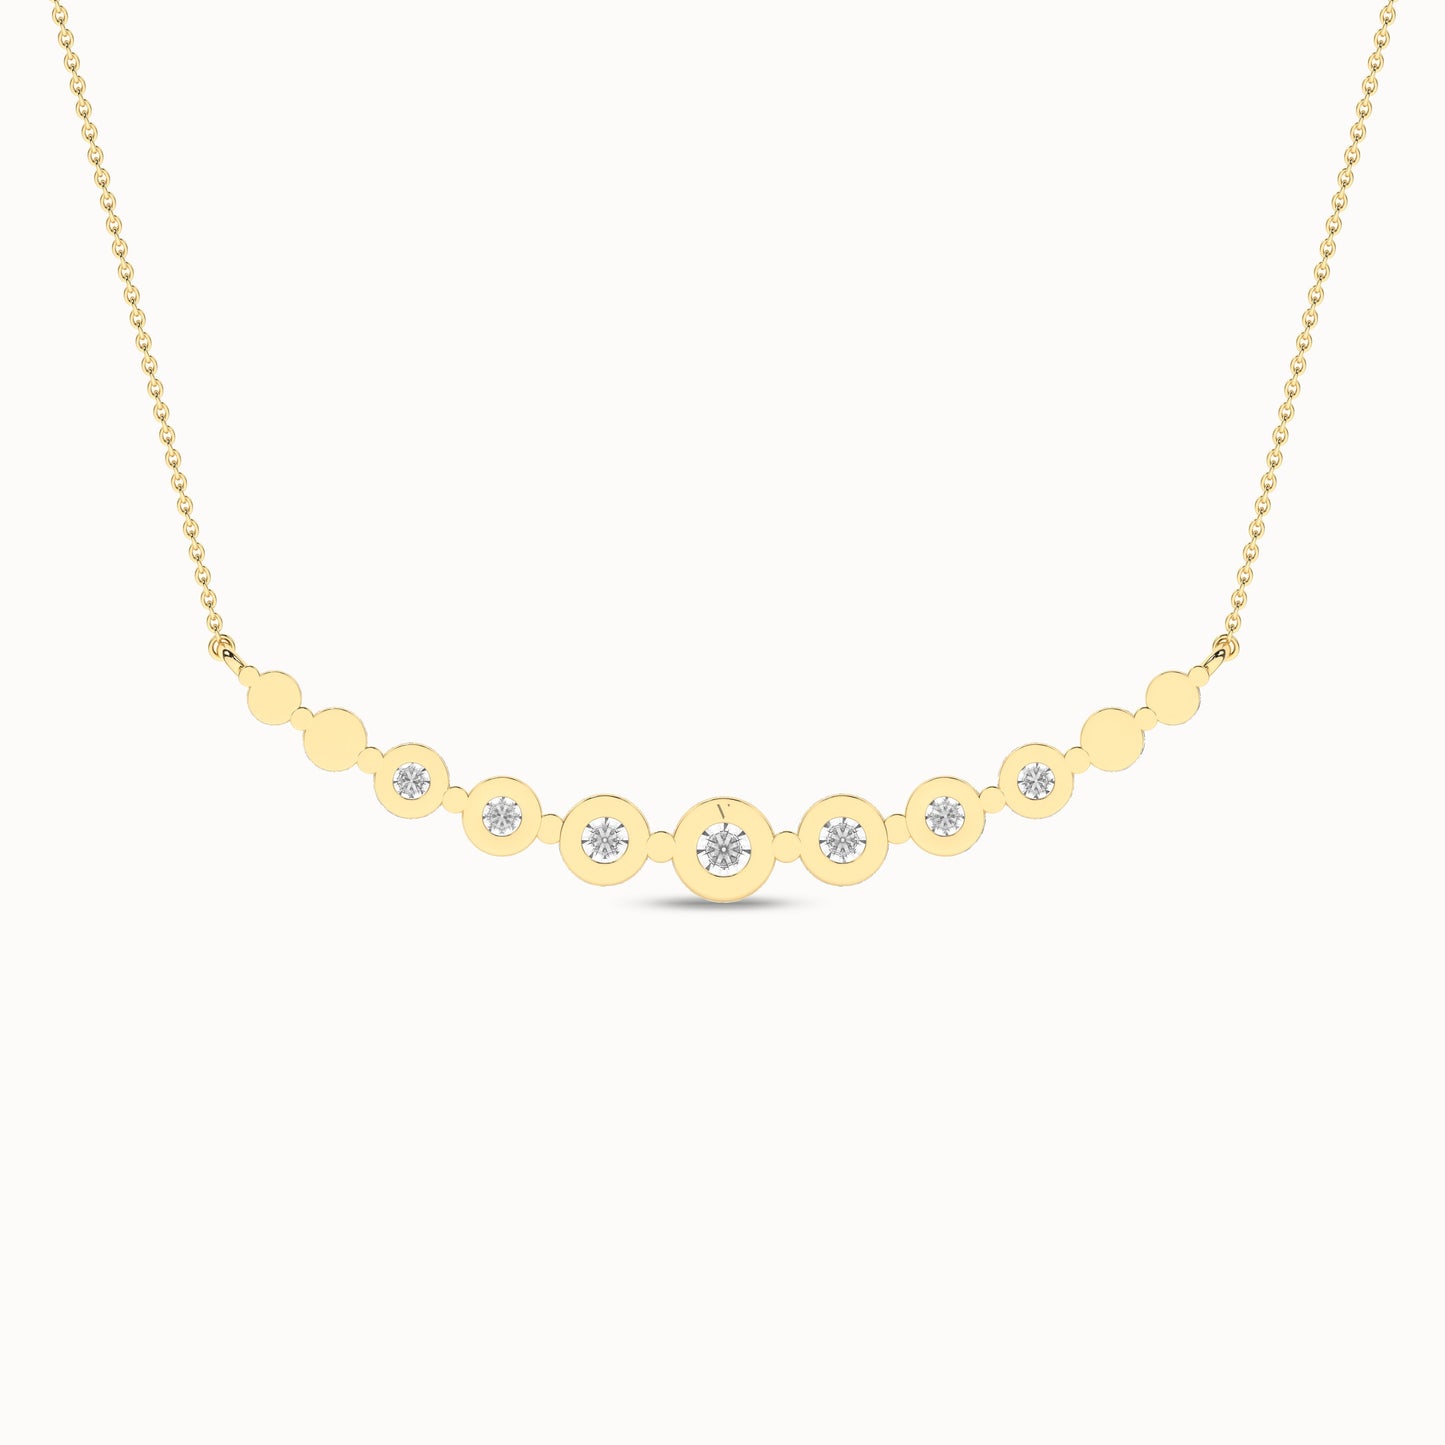 Captivating Necklace_Product Angle_1 1/2Ct. - 3